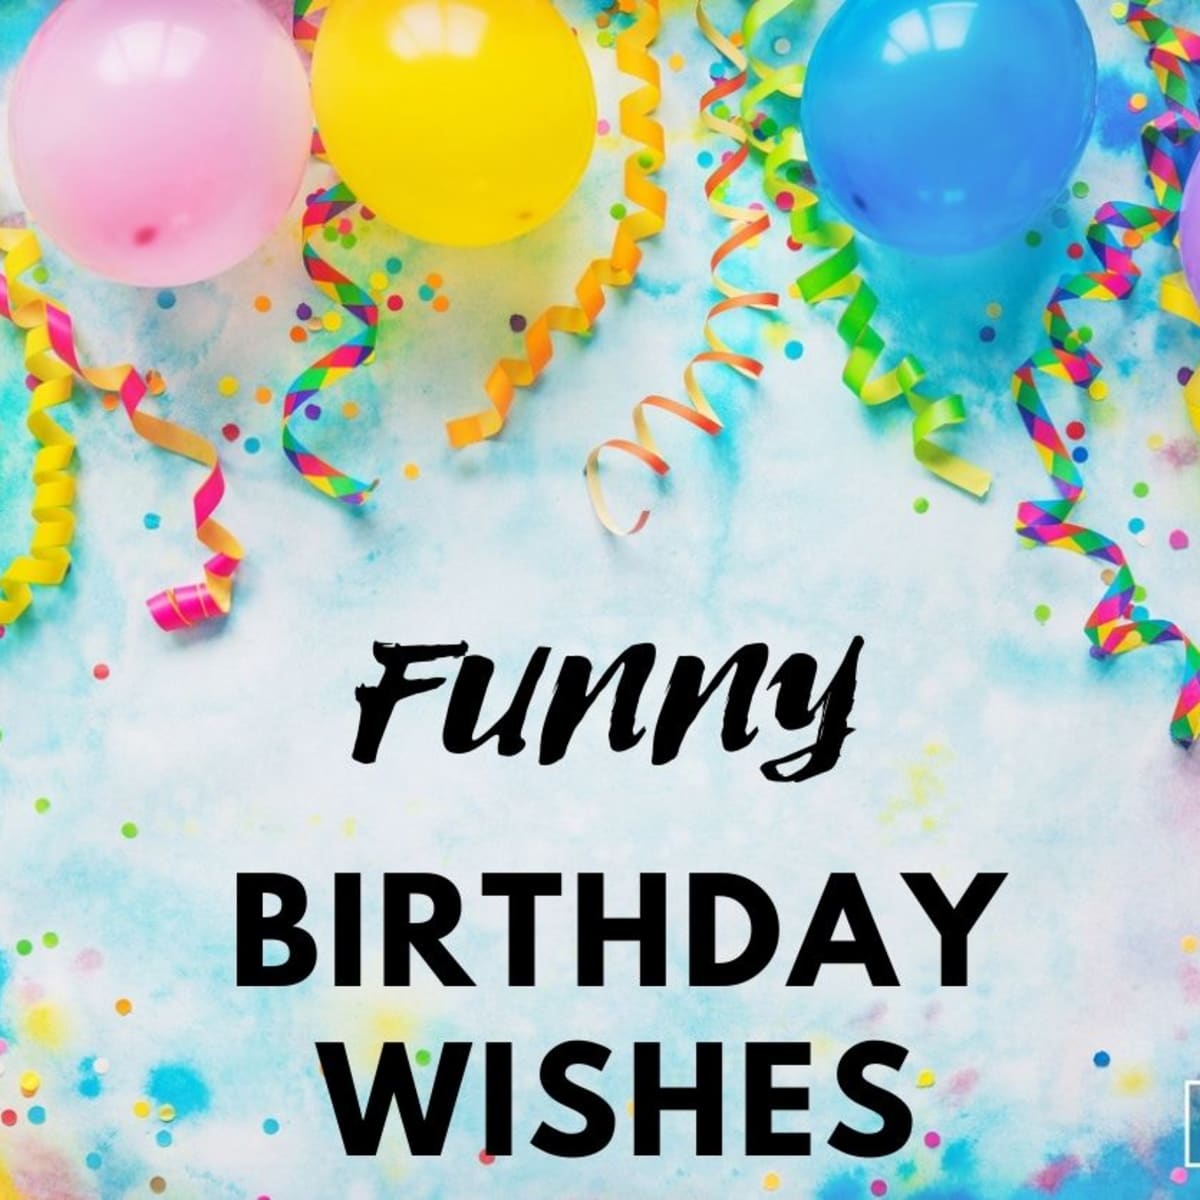 Funny Happy Birthday Song Ideas to Make Someone’s Day